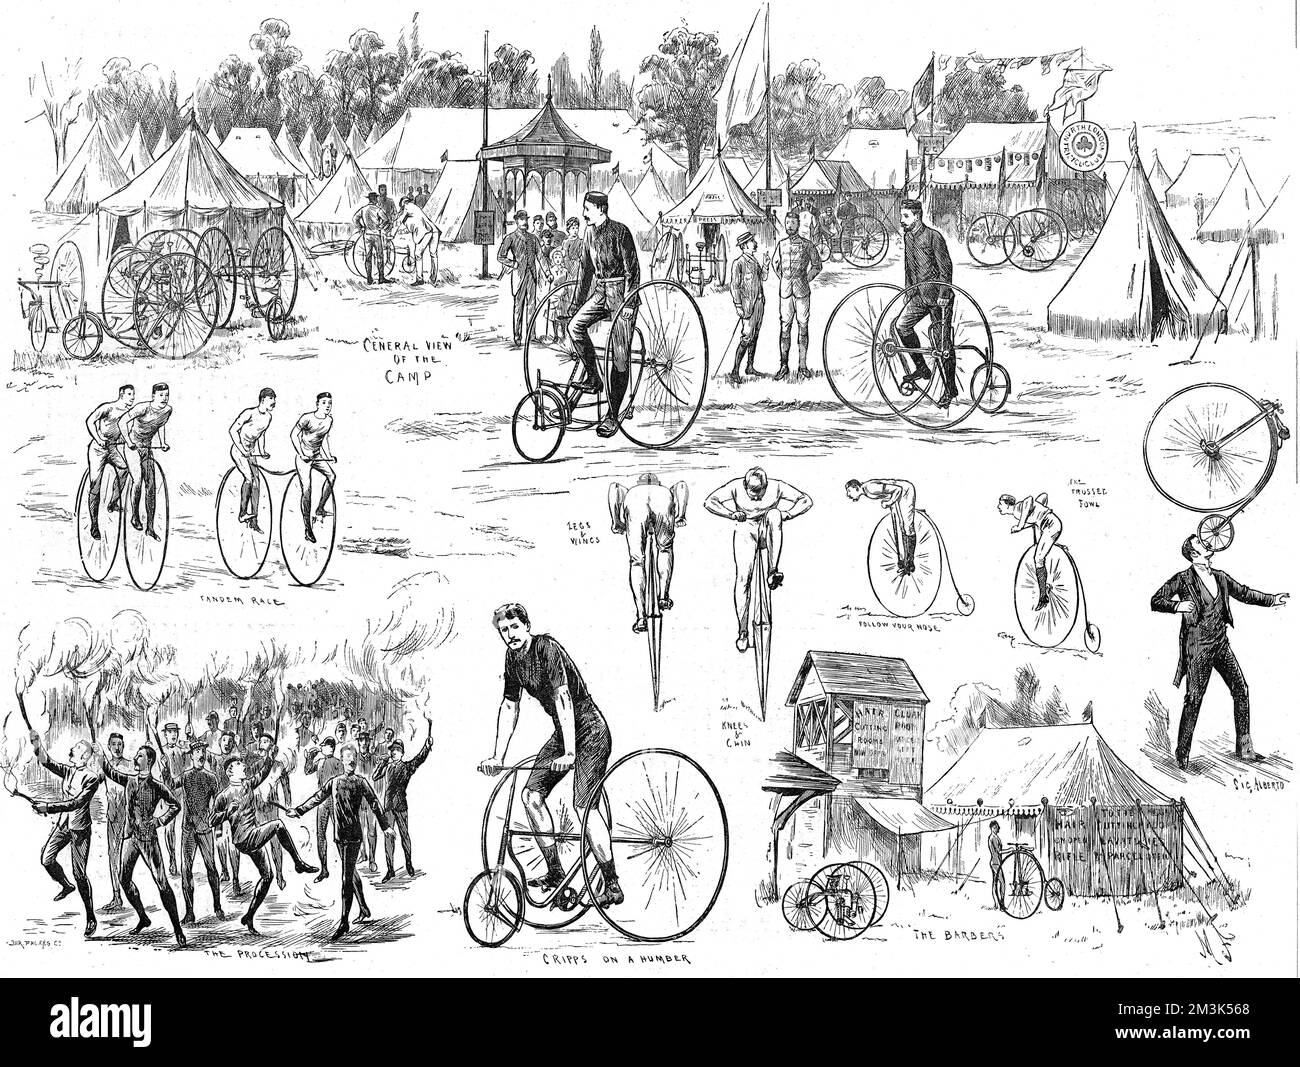 Engraving showing a series of scenes from the Cyclist's Camp, which was held in Alexandra Park, London, in the Summer of 1884.      The images show tricycles, 'penny farthing' bicycles and even 'penny farthing' tandem races.     Date: 14 June 1884 Stock Photo